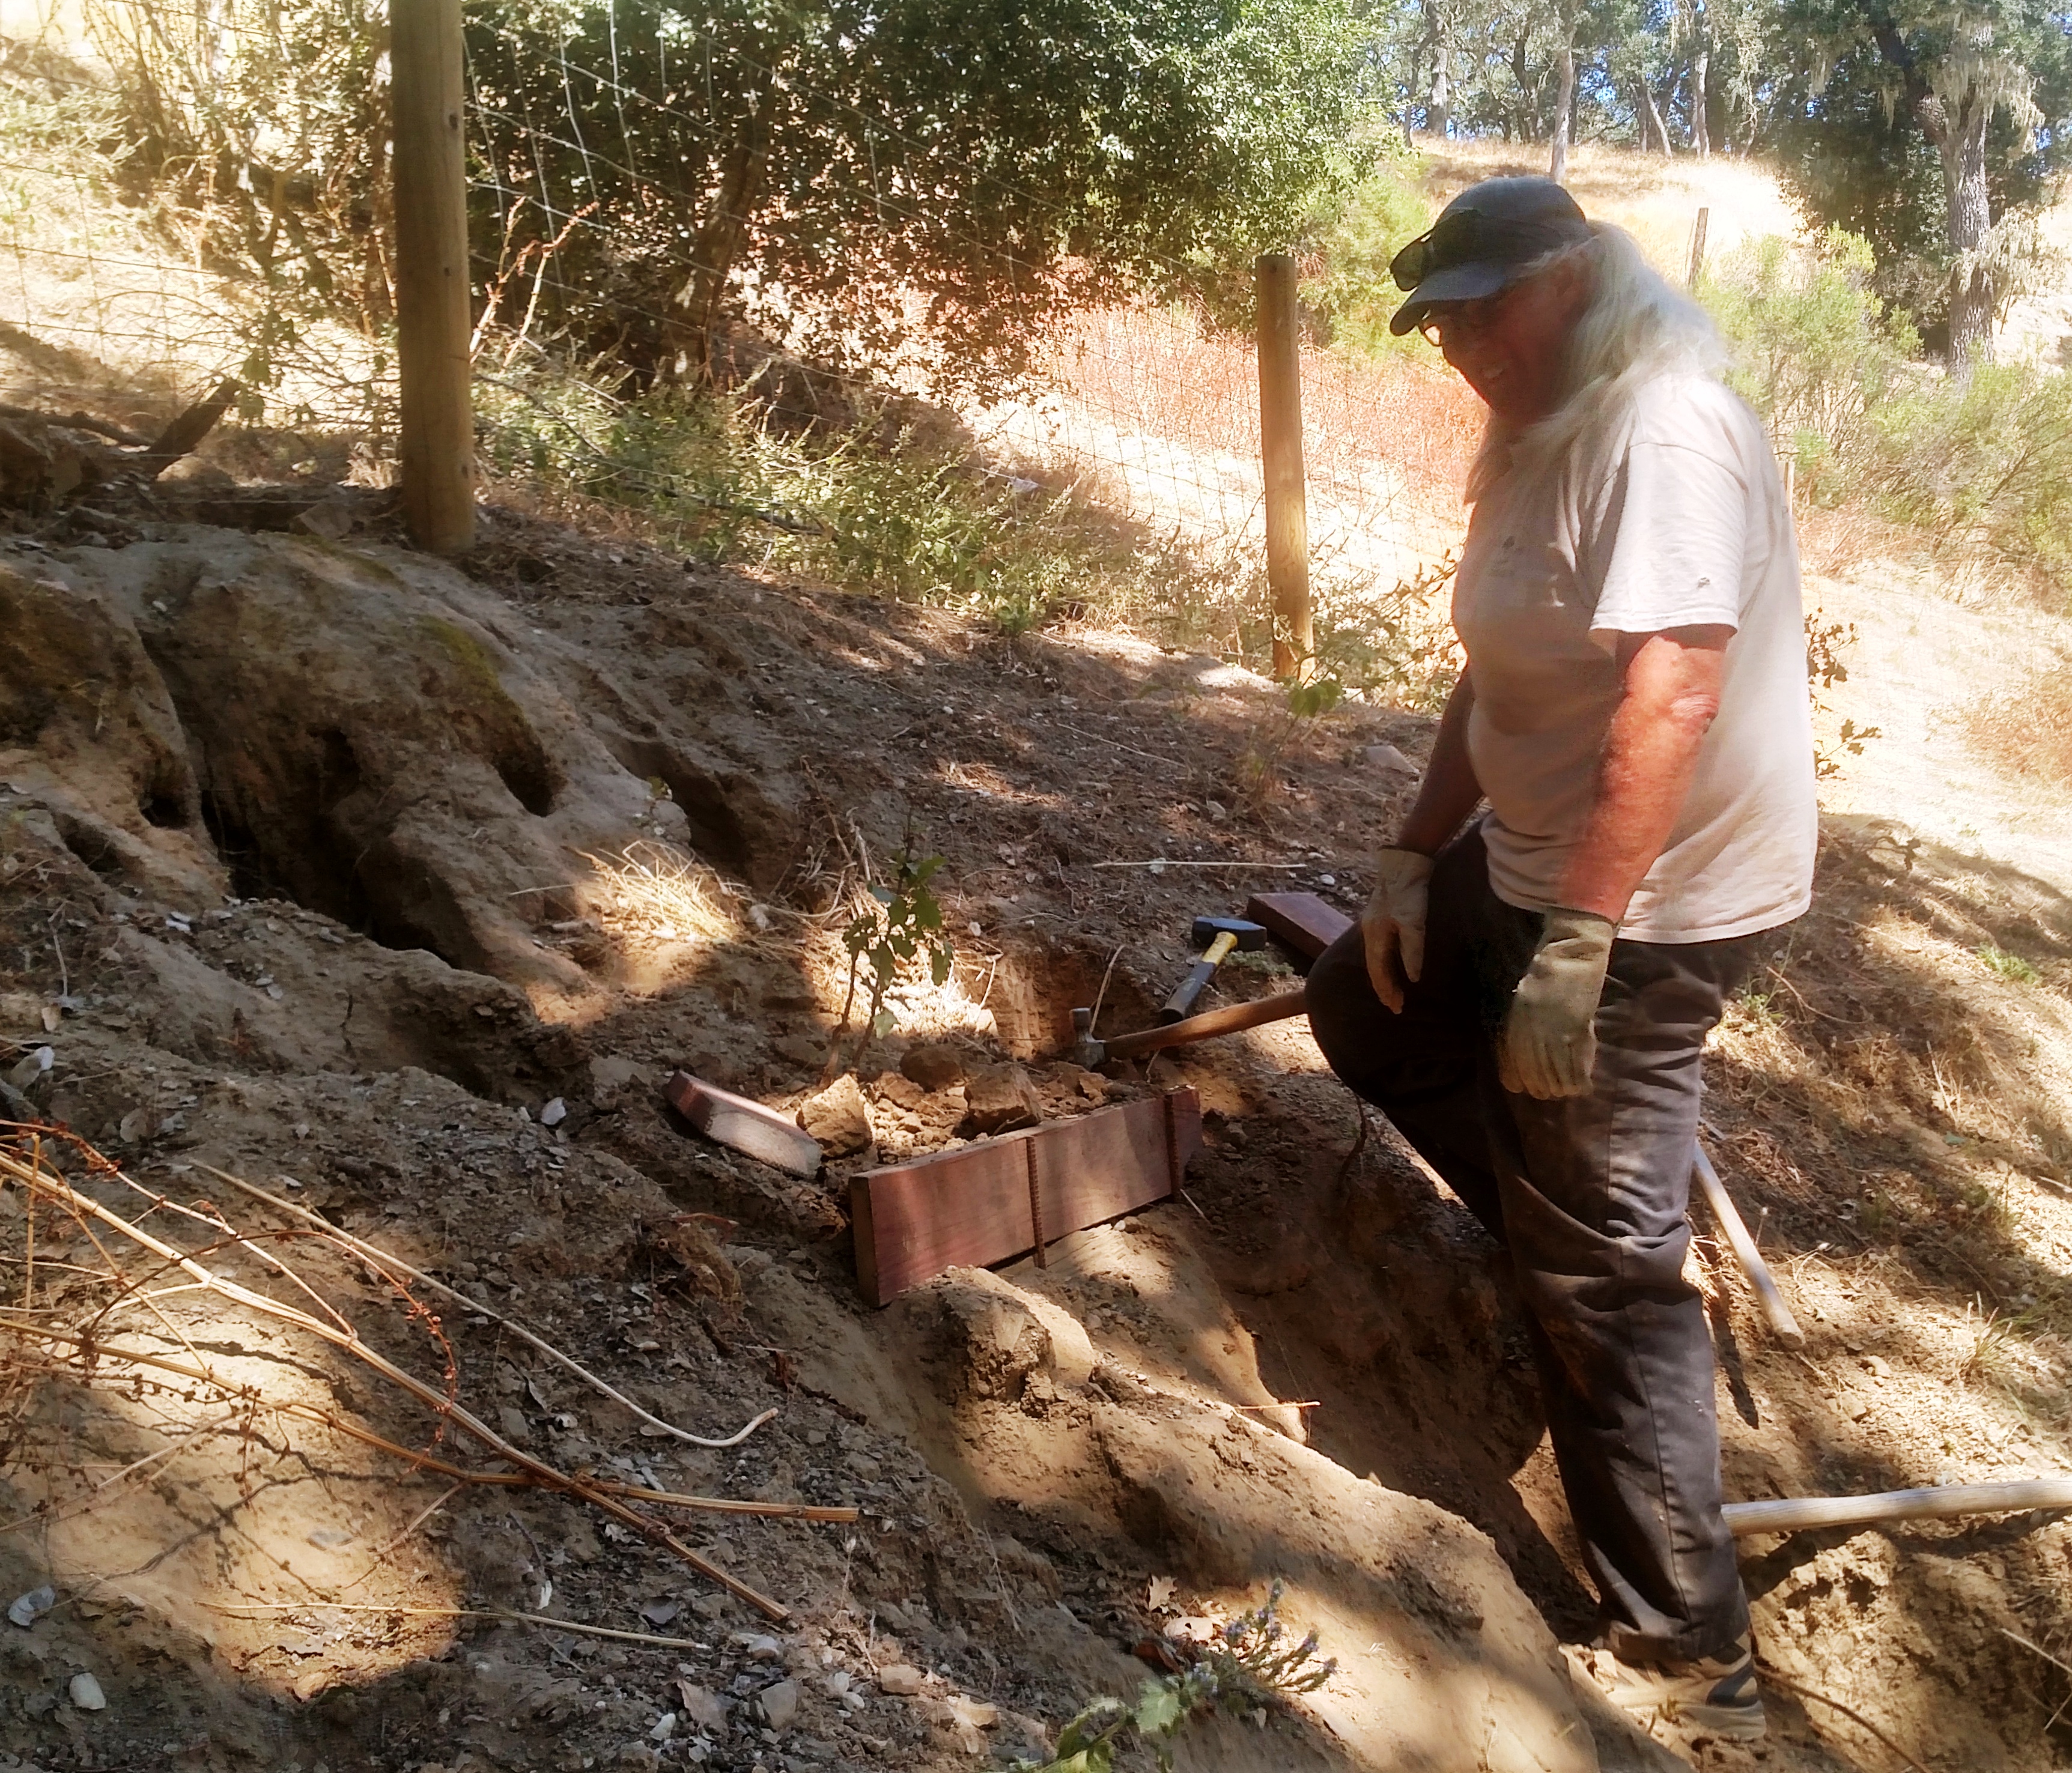 Dave building a small retaining wall around a small oak tree.